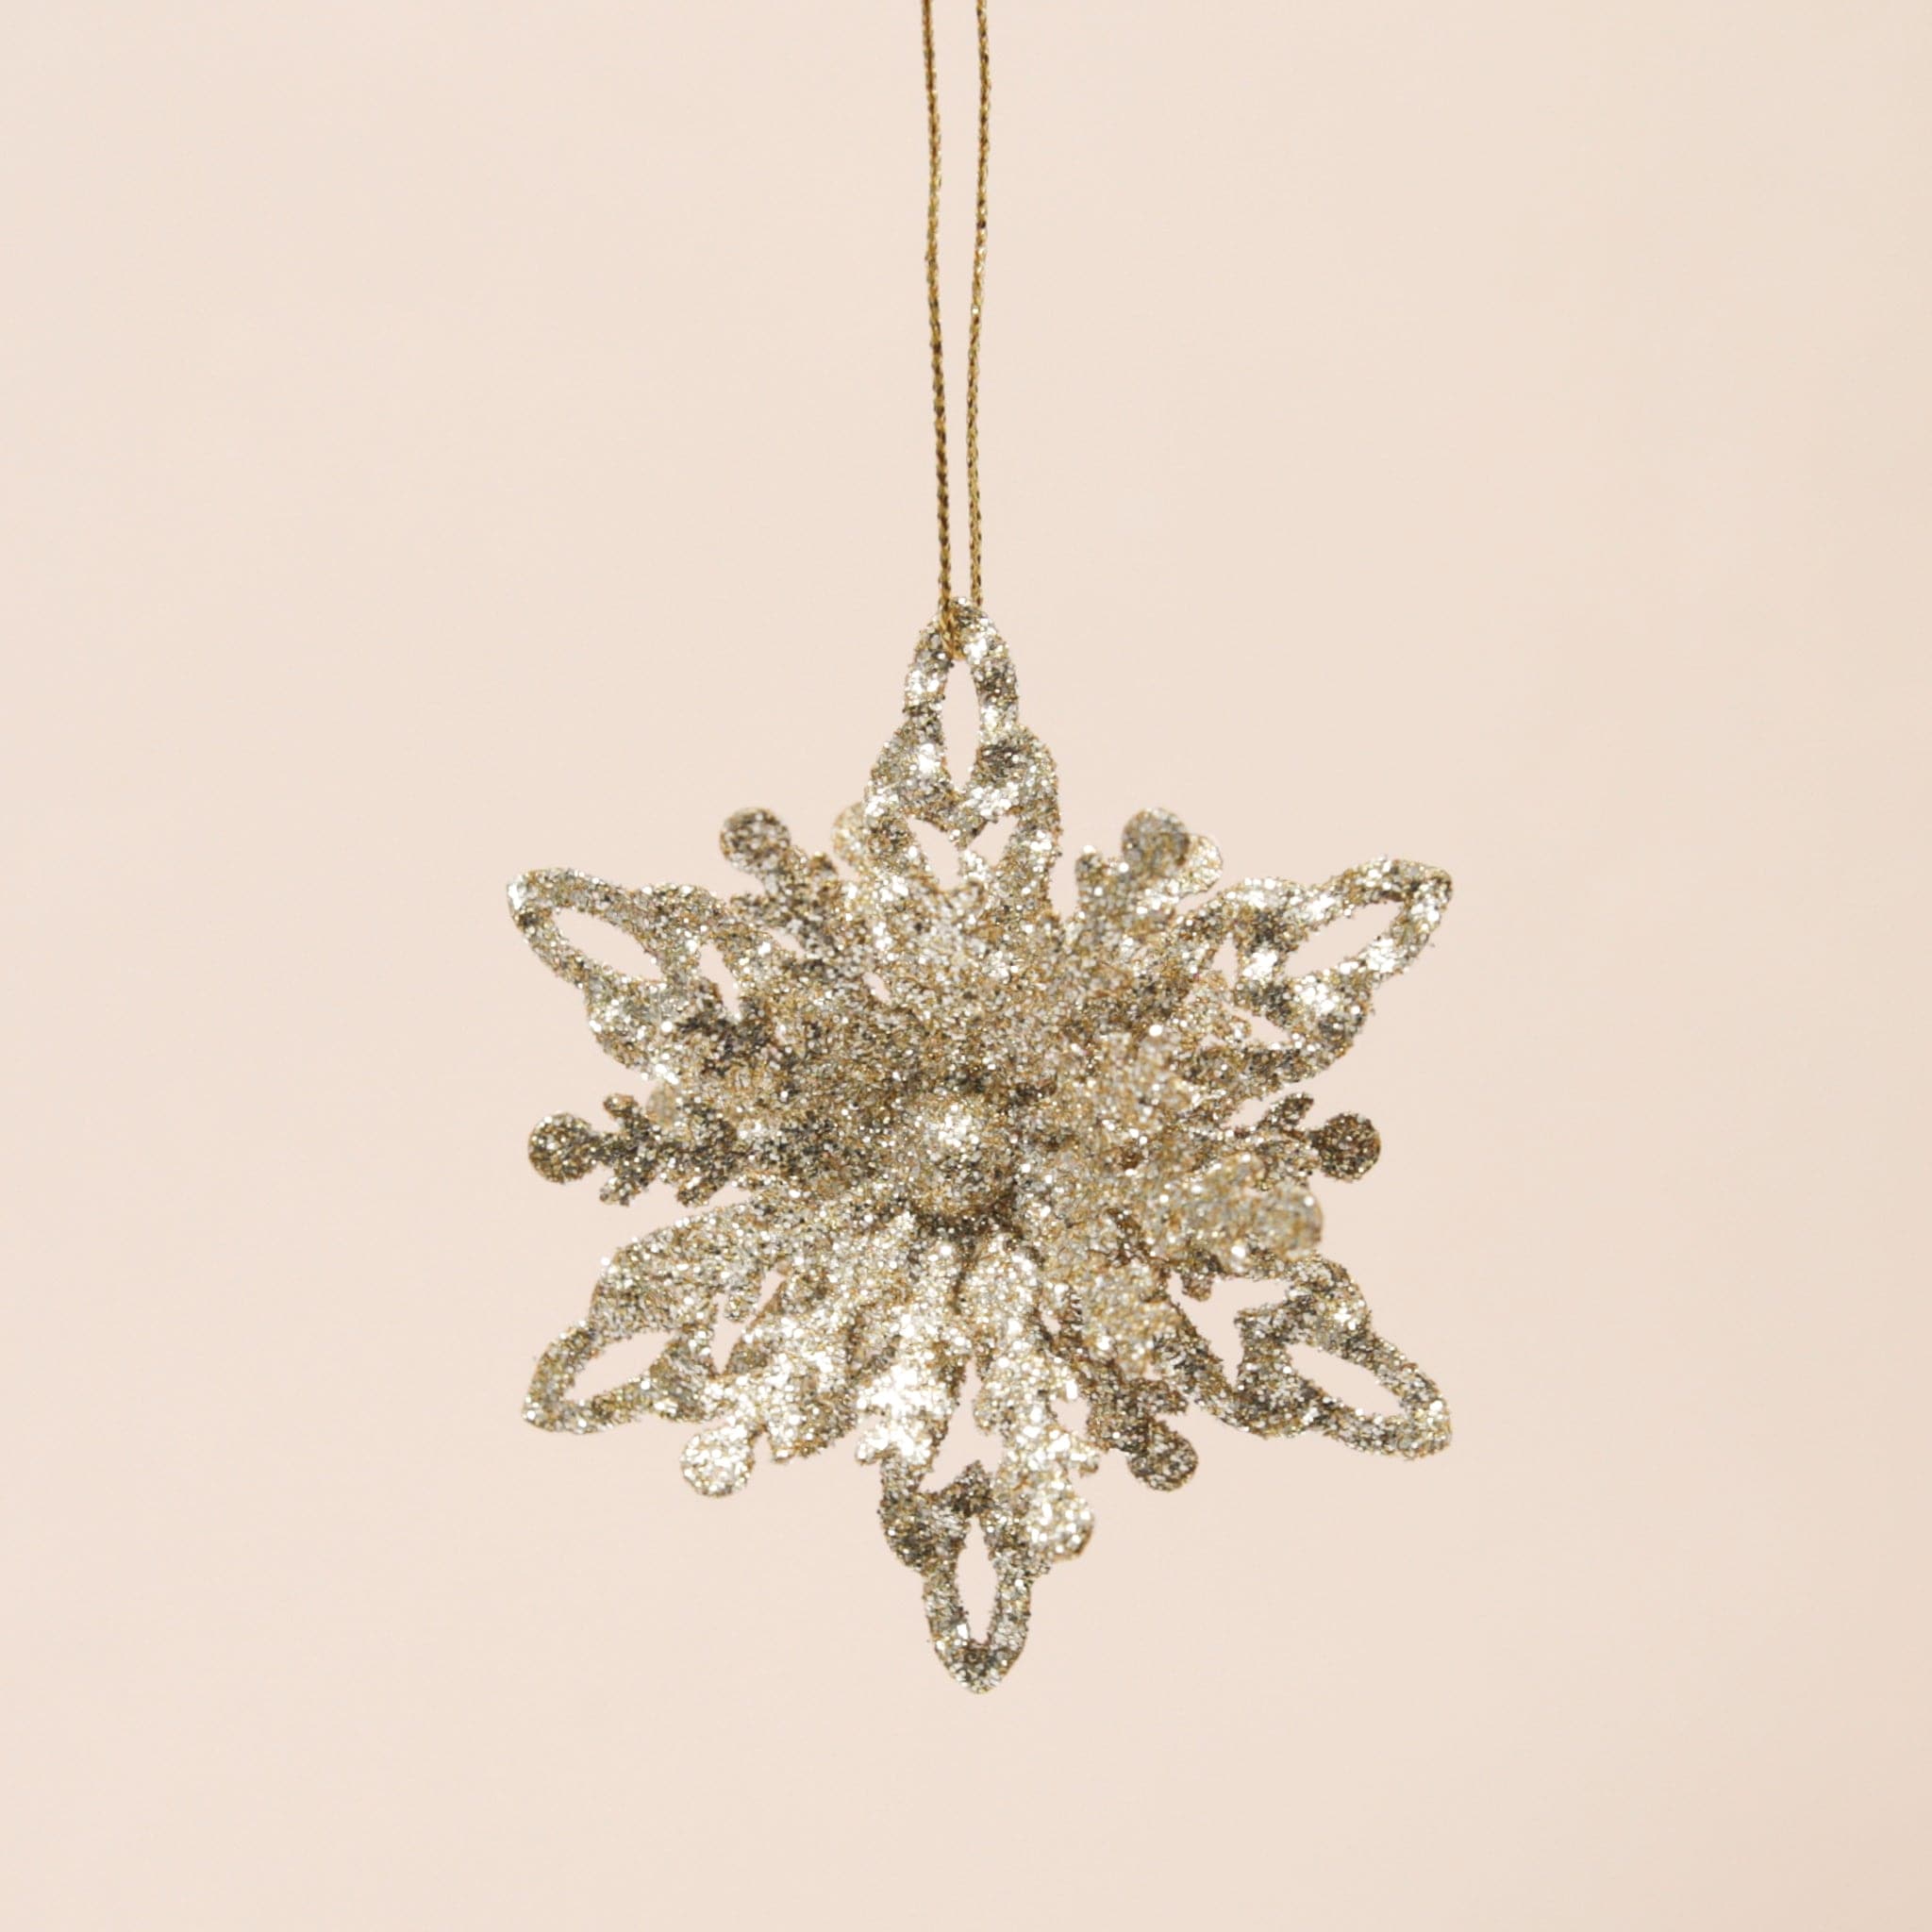 A gold metal snowflake ornament with intricate detailing. This is version three, which is a combination of the two previous options. I has a mix of open points and solid points.